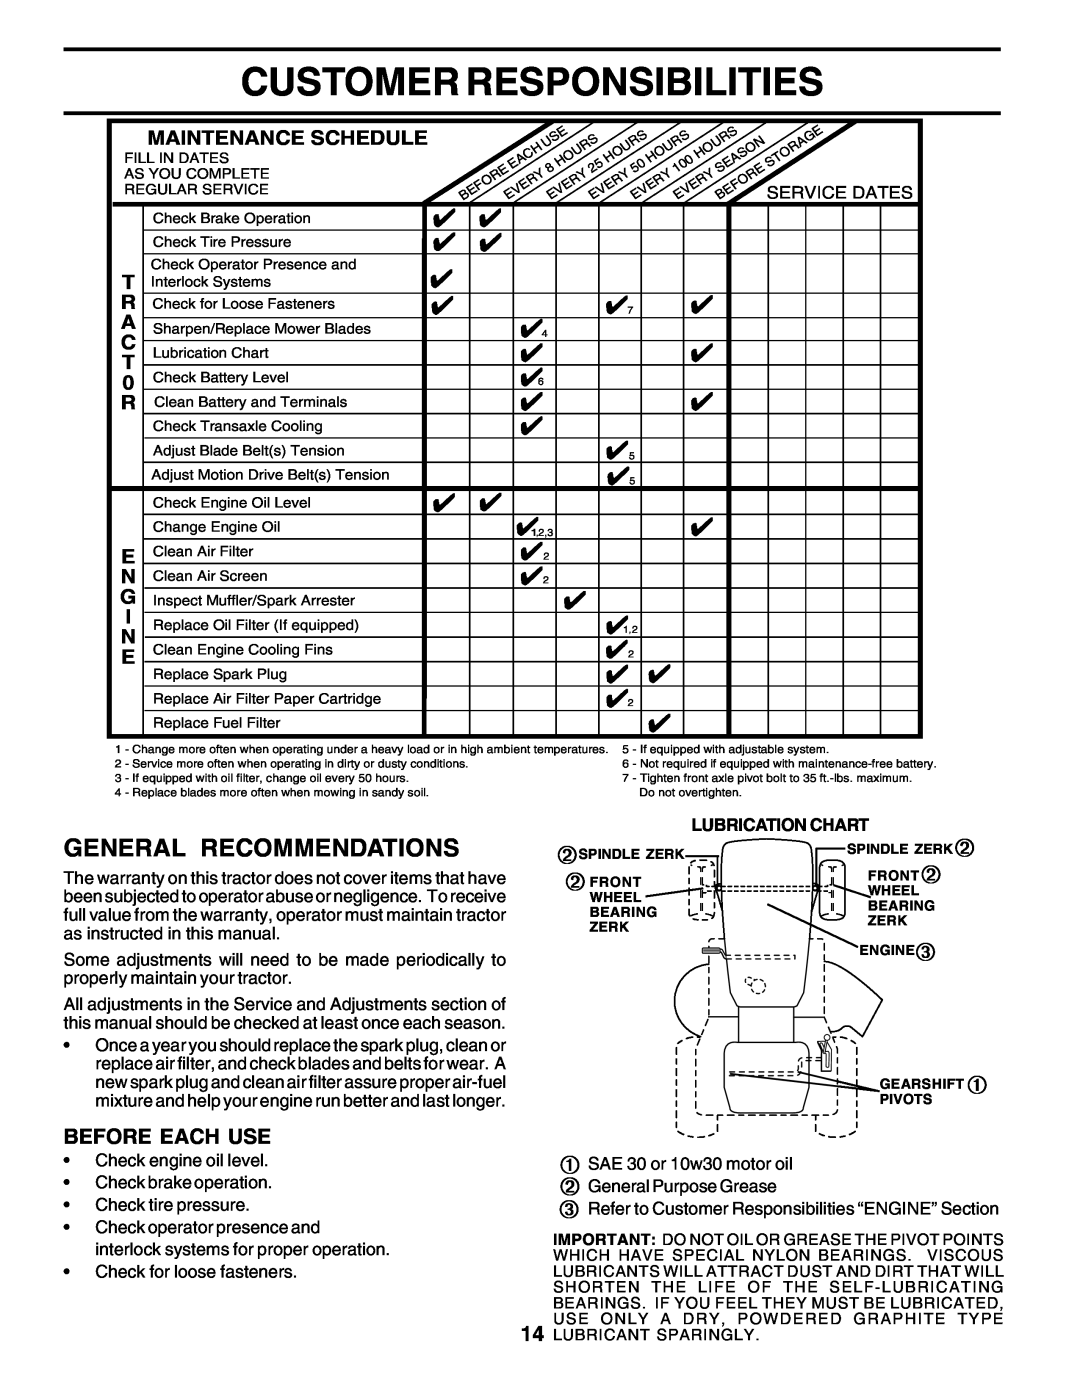 Poulan PC14542D owner manual Customer Responsibilities, General Recommendations, Before Each Use 